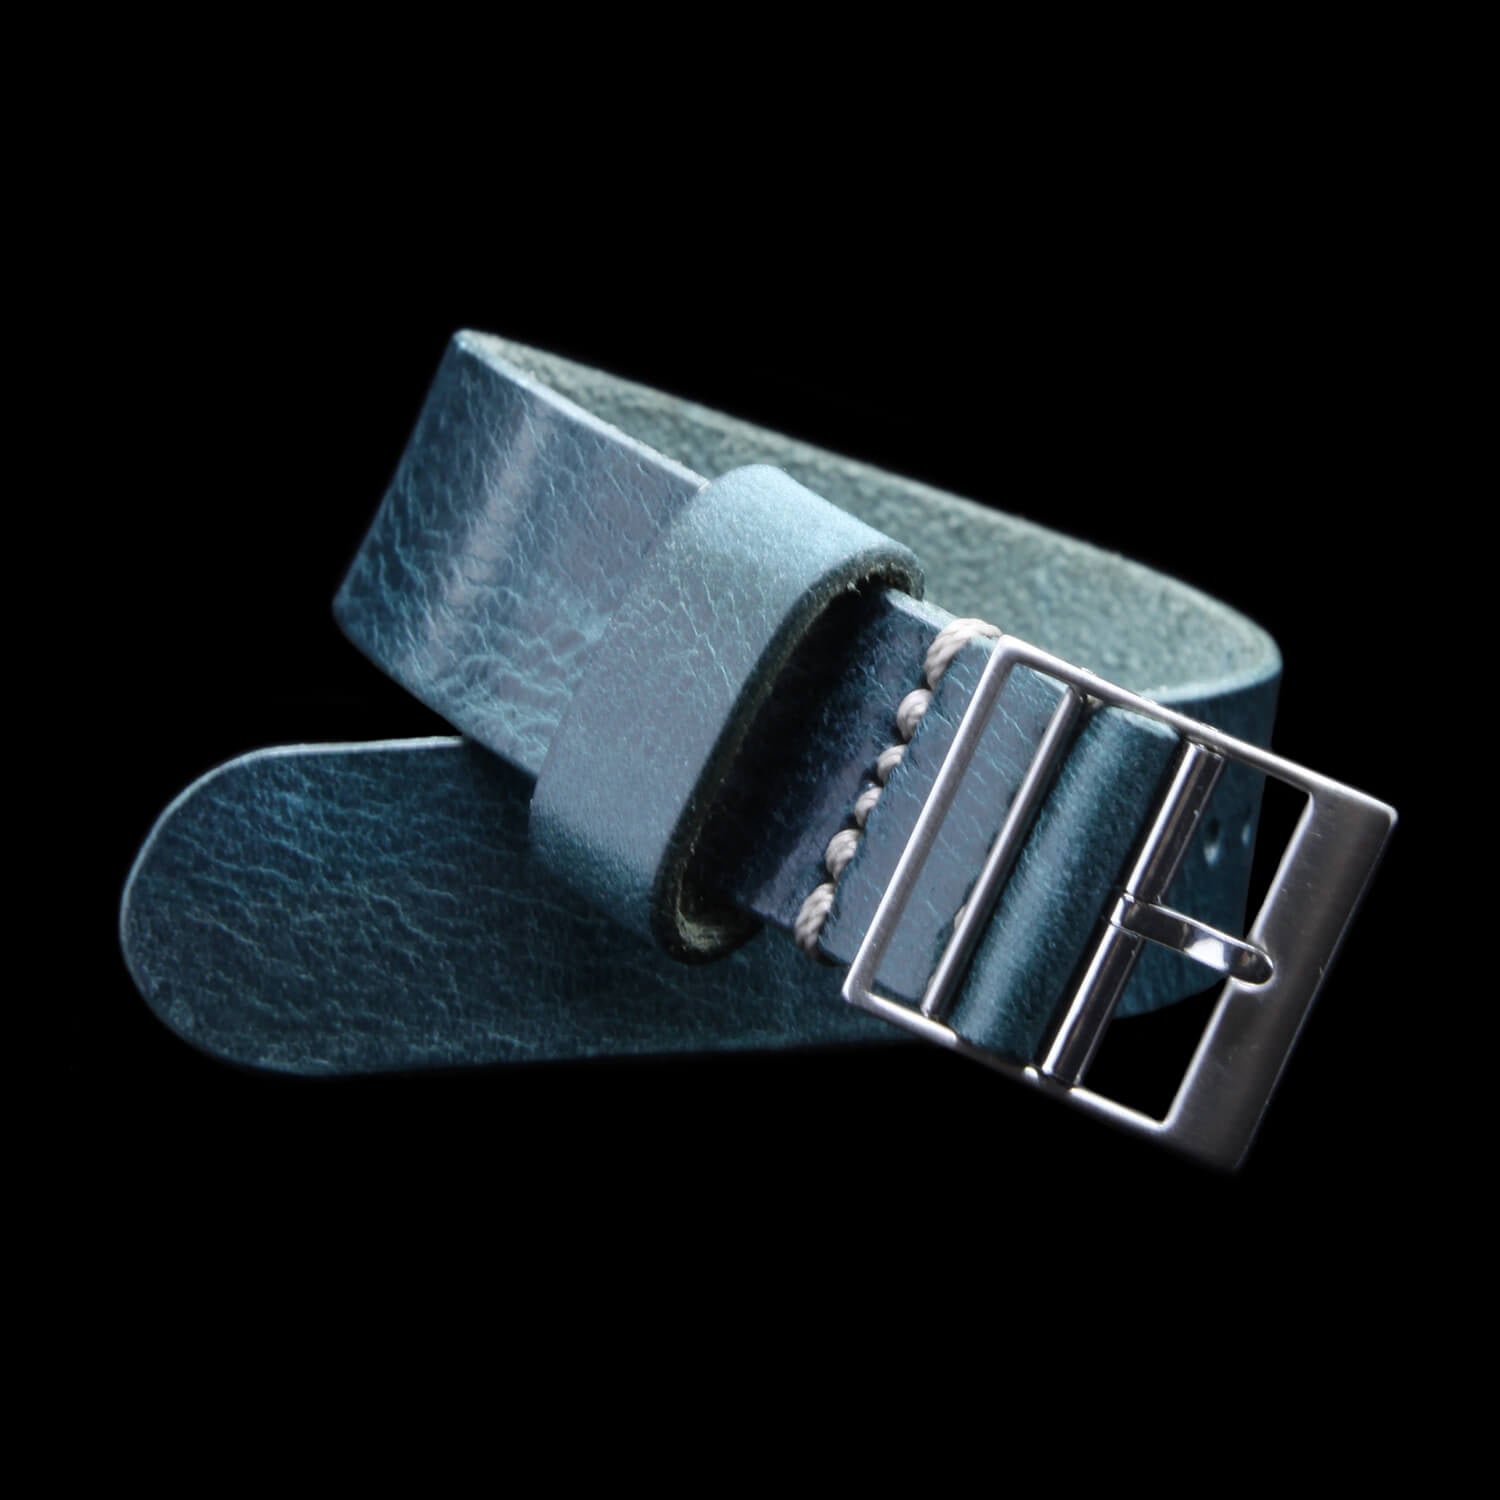 Leather Watch Strap, Classic RAF II Military 106 | Ladder Buckle | Full Grain Italian Vegetable-Tanned Leather | Cozy Handmade